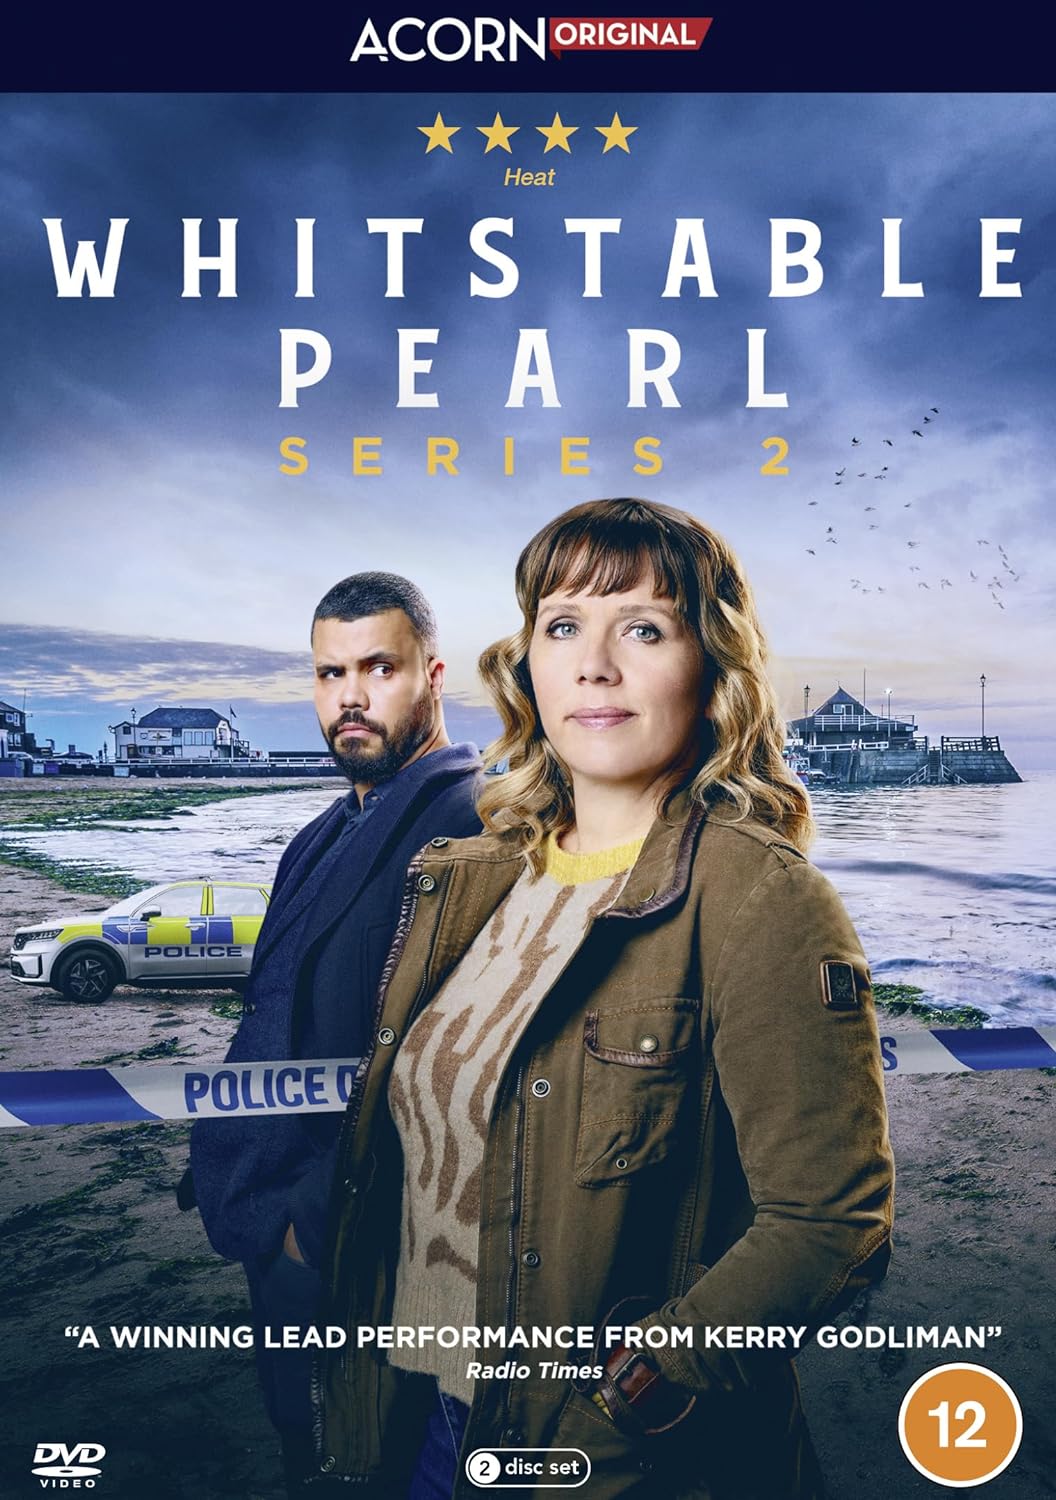 Whitstable_Pearl_series_2_dvd_cover.